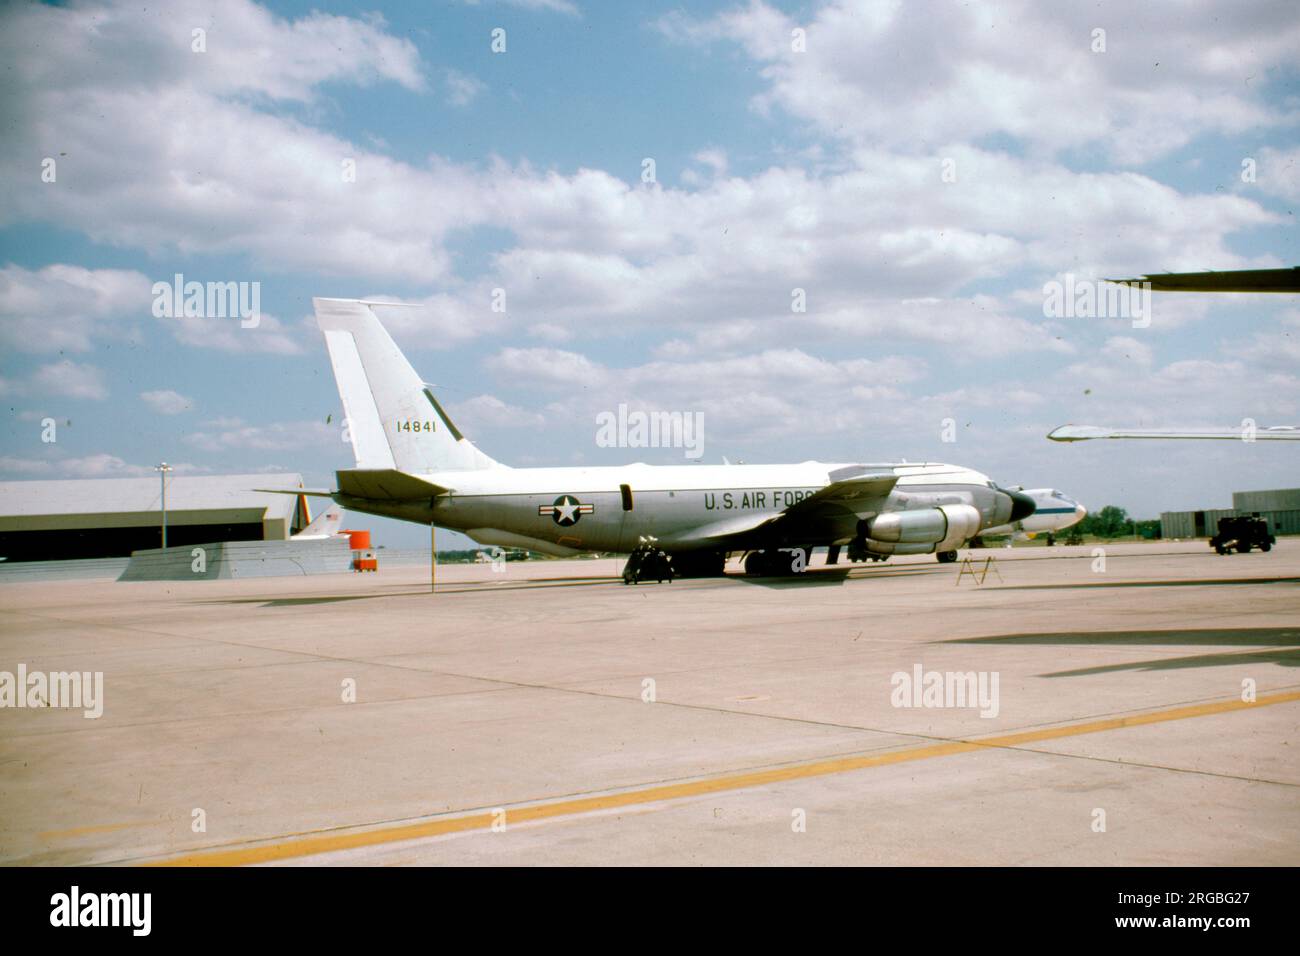 United States Air Force - Boeing RC-135C Big Team 64-14841 (msn 18781) Banque D'Images